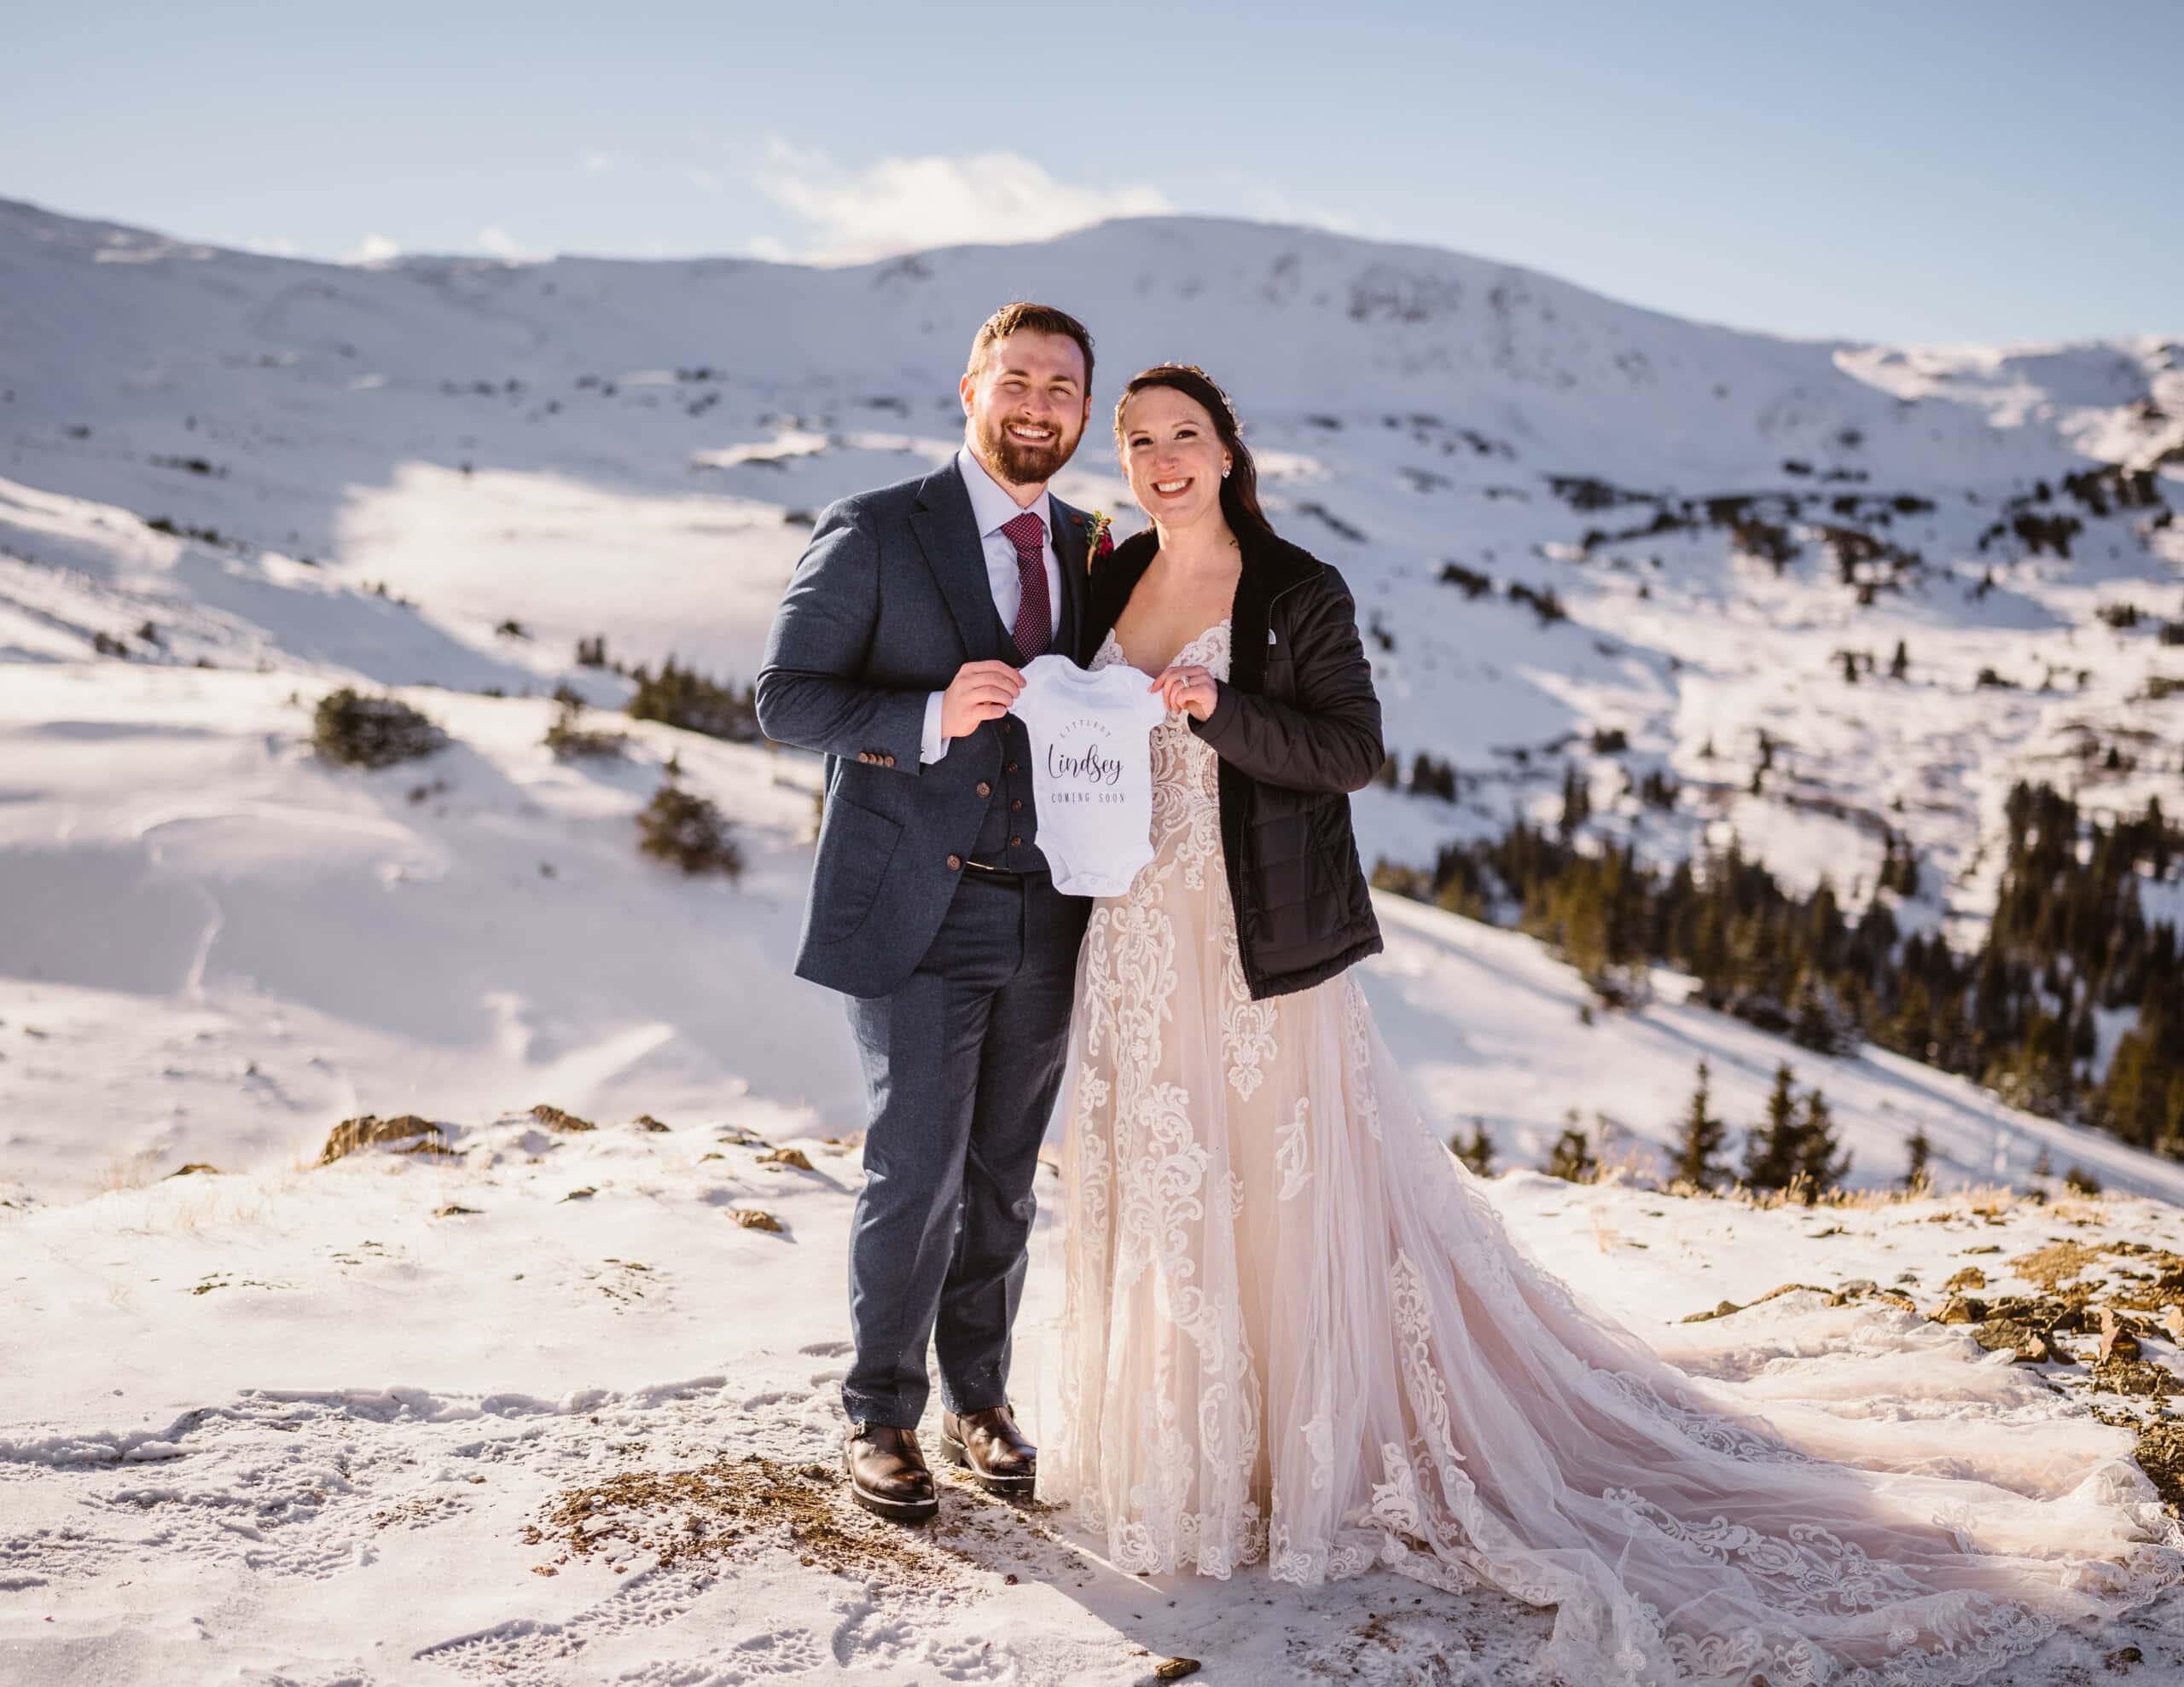 Bride and groom showing off their baby's outfit in the snow of Colorado.